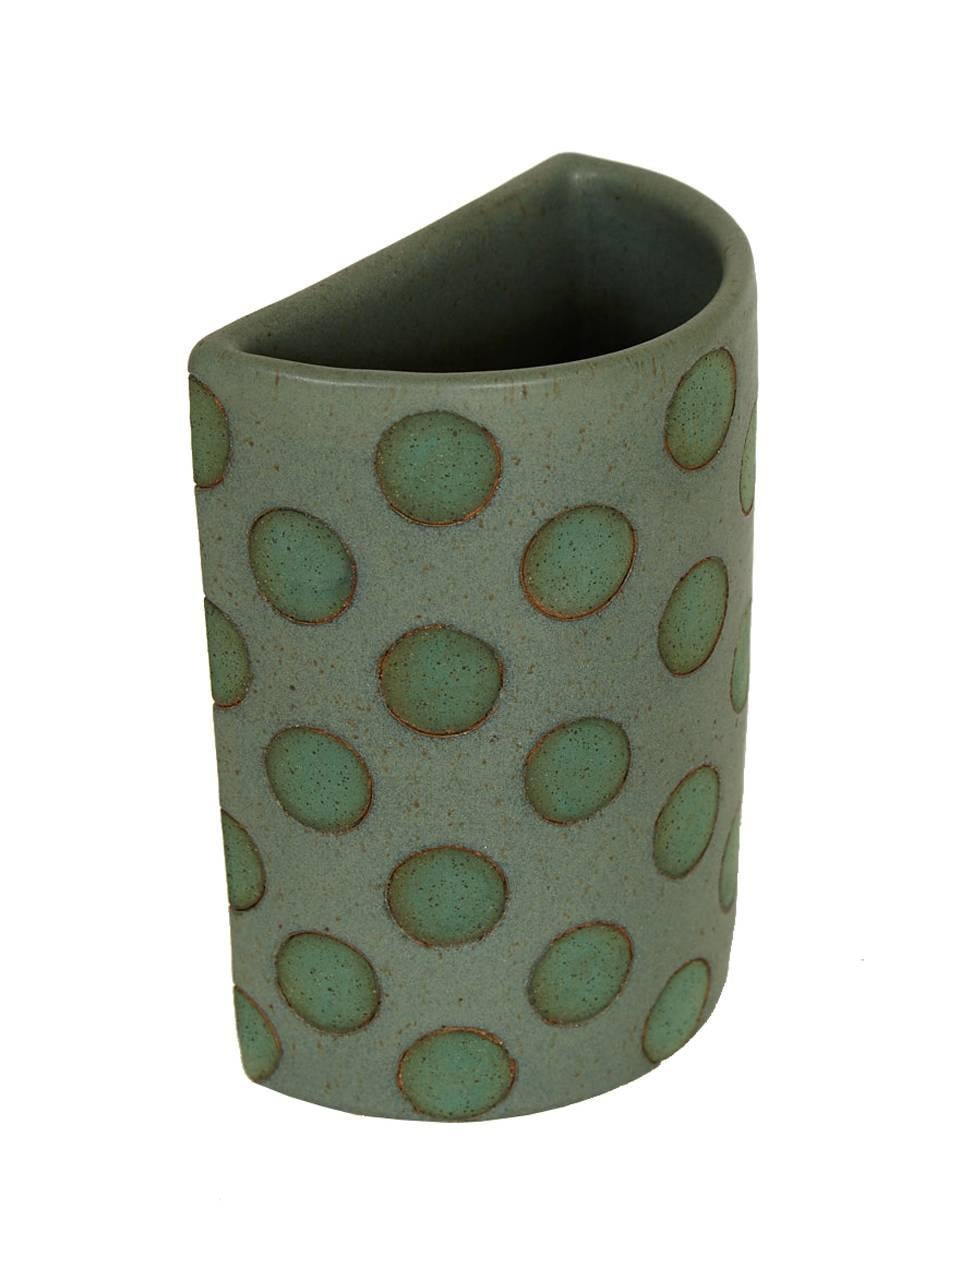 Green split polka dot vases by Matthew Ward.
Matthew Ward, born in 1976 in Omaha, NE, is a graduate of the School of the Museum of Fine Arts, Boston, MA (2003). He currently resides in Brooklyn, NY and continues a studio practice including painting